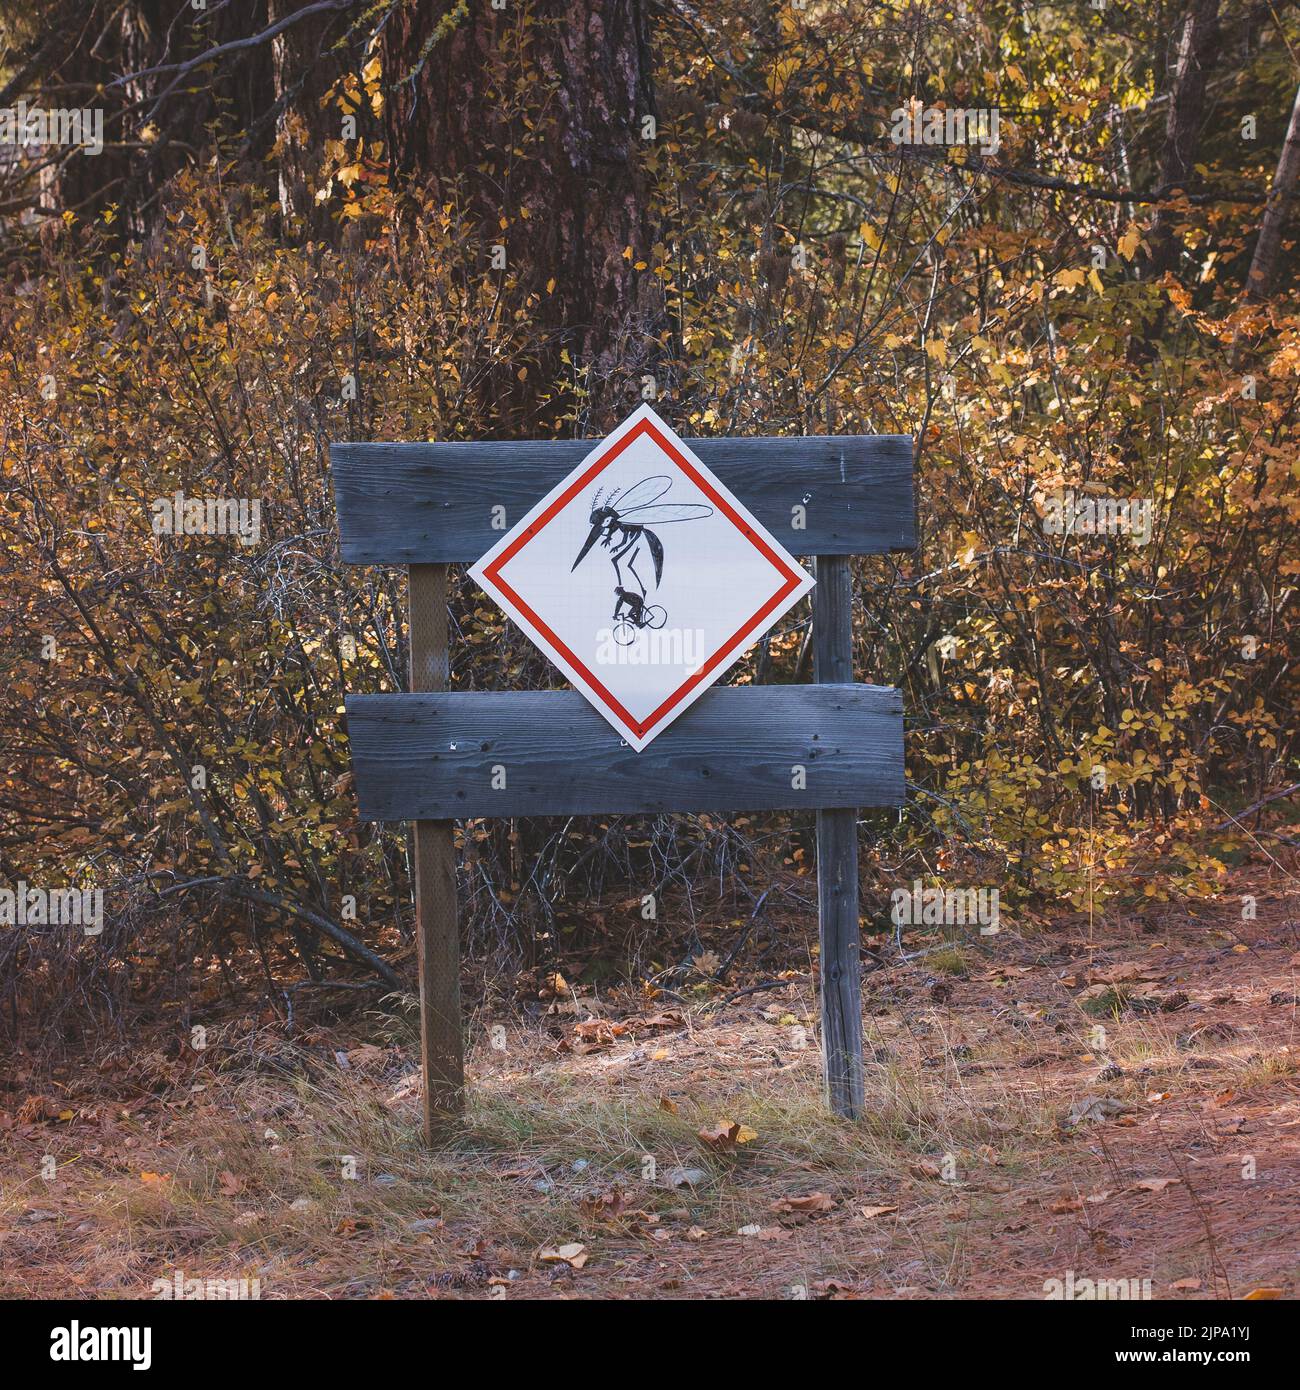 Beware of Murder Hornet Sign in Fall Forest Stock Photo